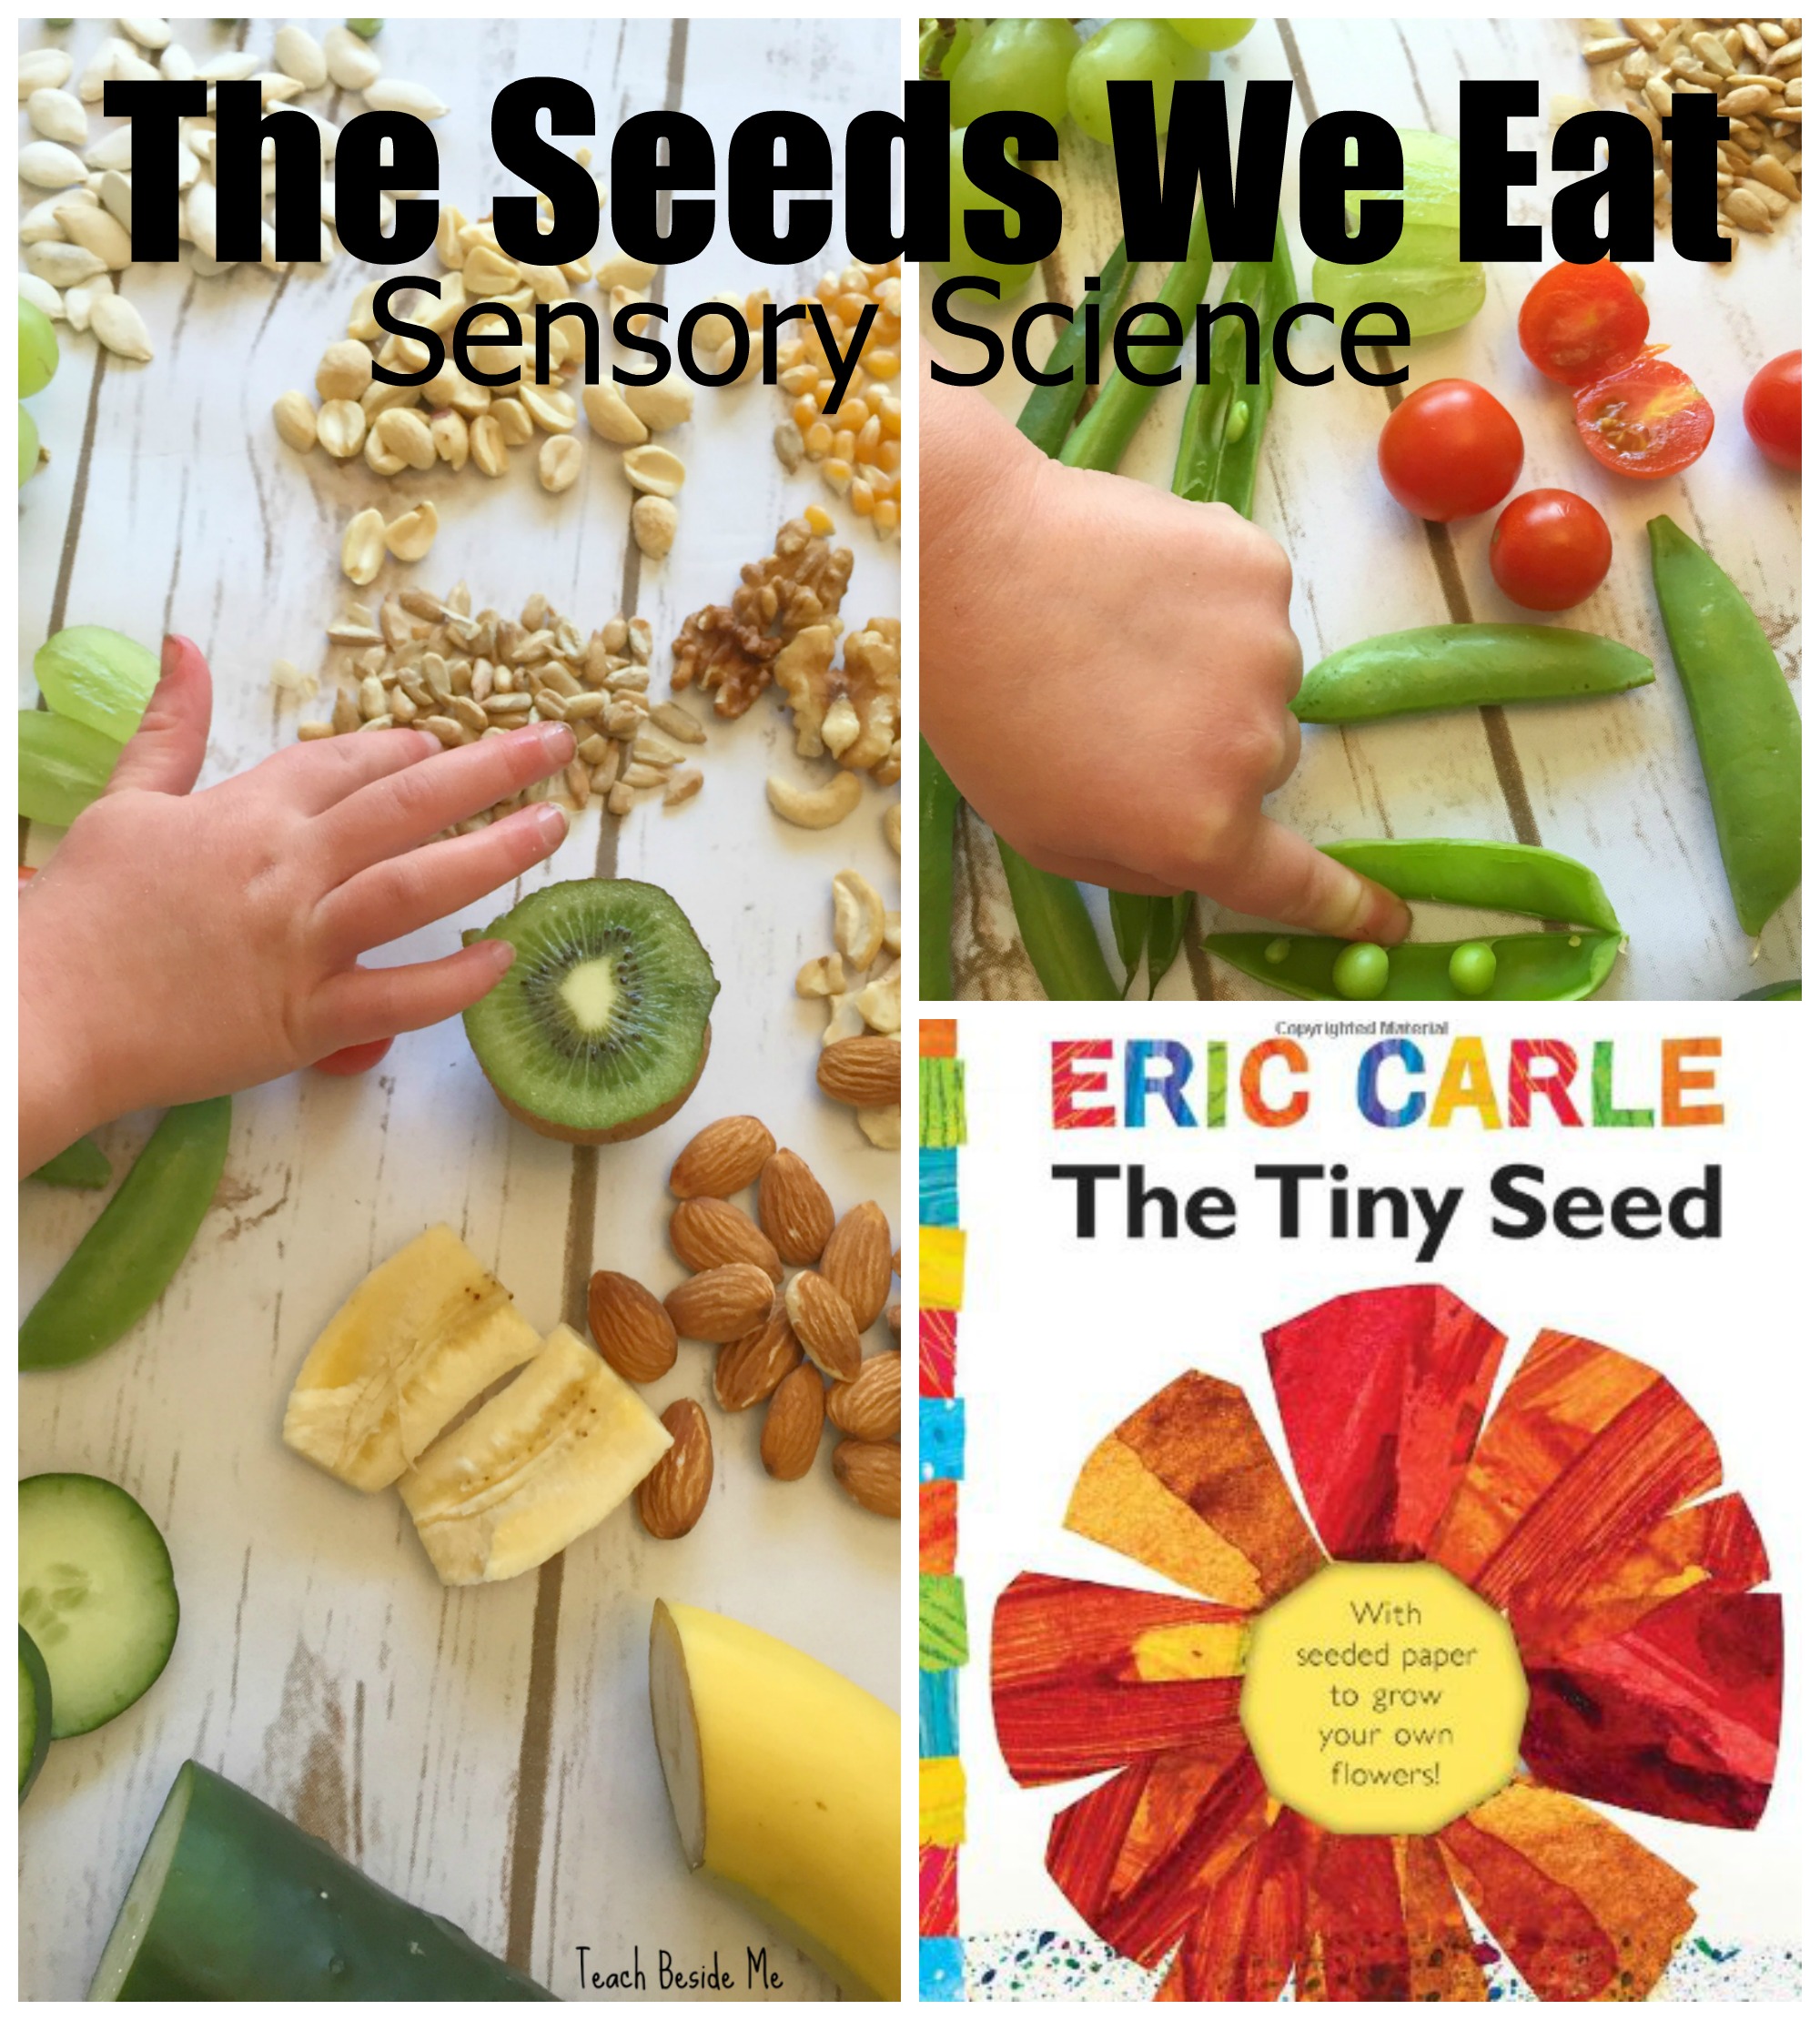 the seeds we eat- nature sensory science for kids. Great with Eric Carle's Tiny Seed book